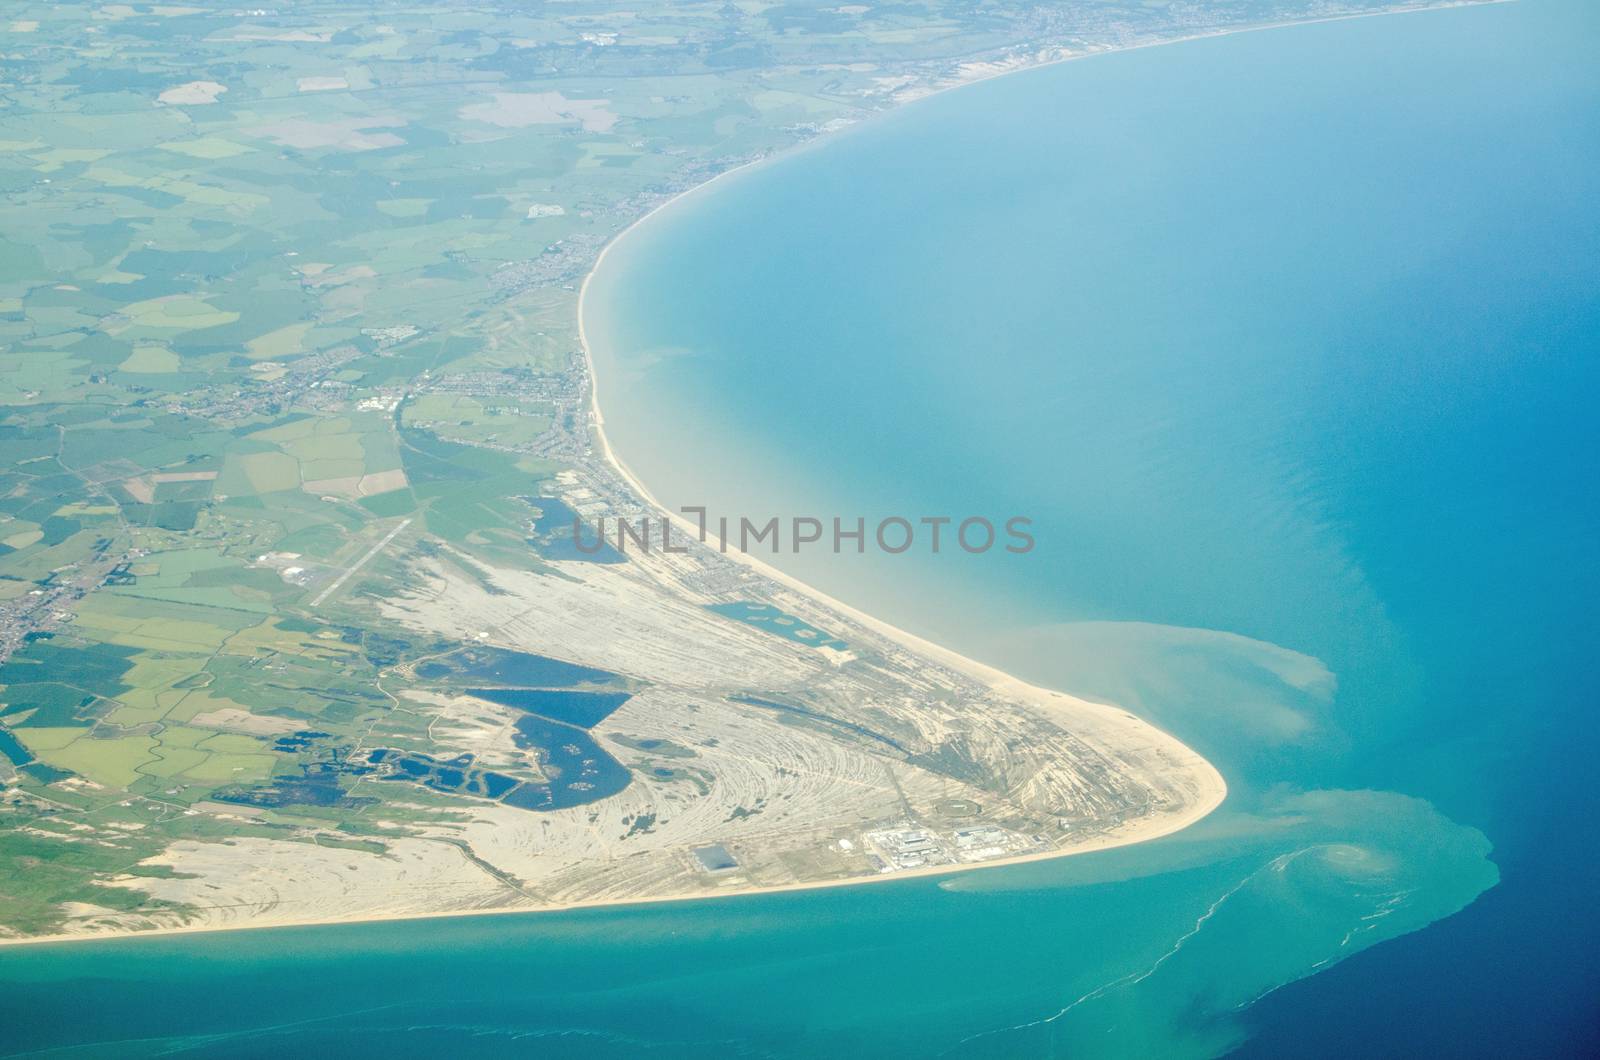 Aerial view of Dungeness headland jutting into the English Channel at Kent, England.  Towards the bottom is the Dungeness nuclear power station and to the left is London Ashford Airport.